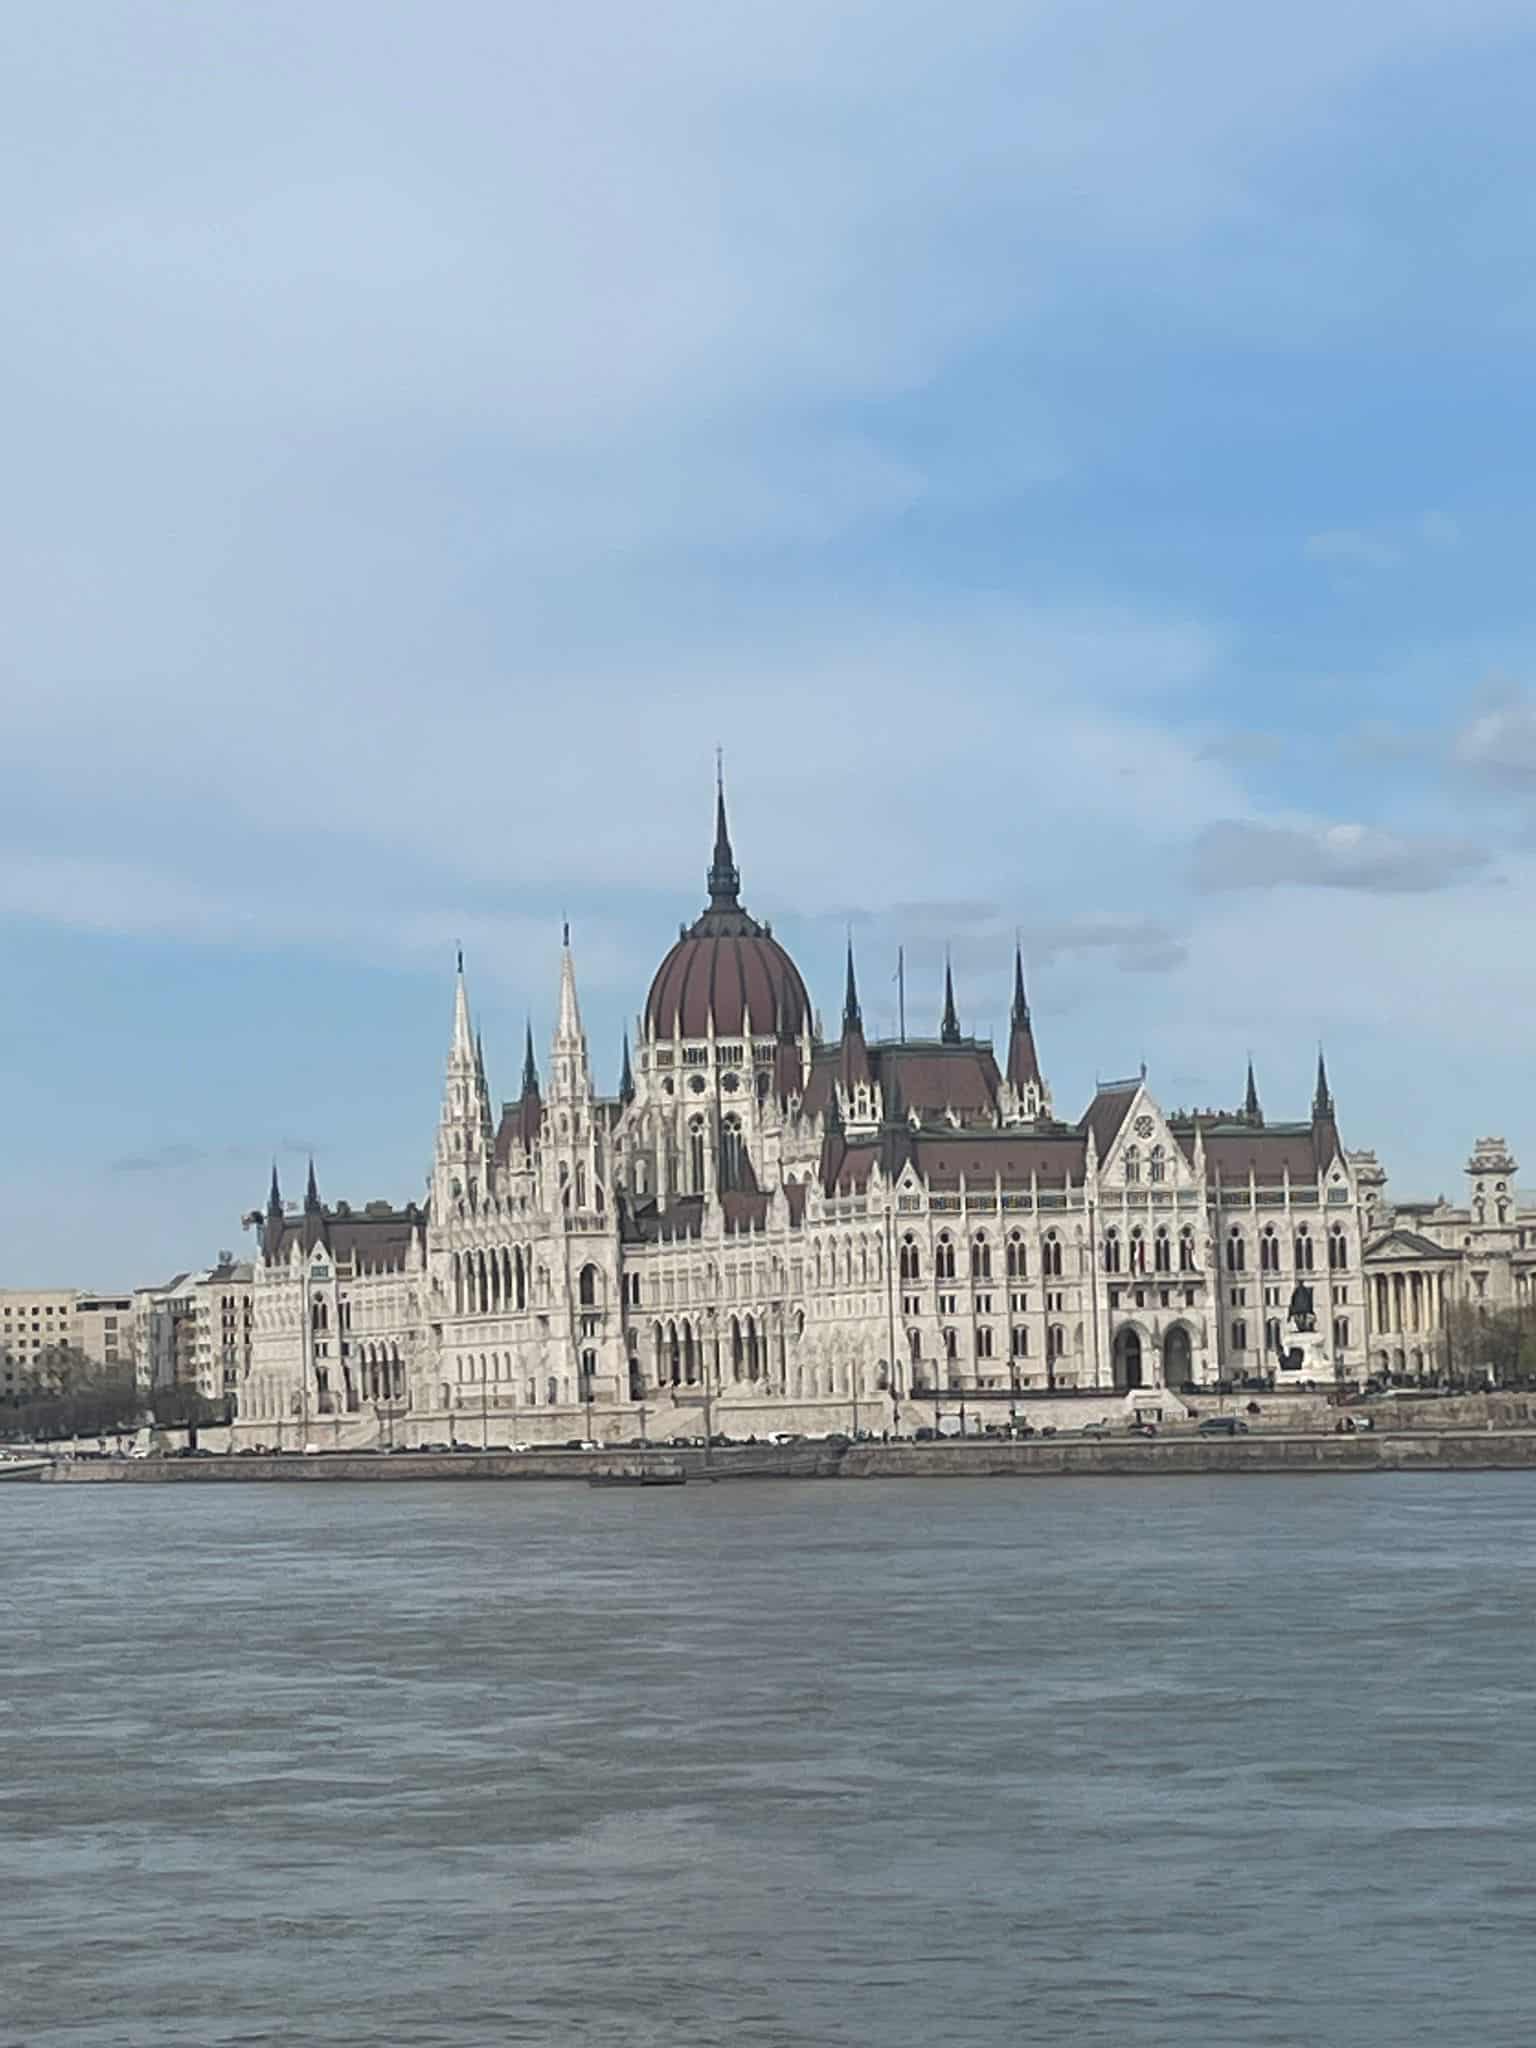 The Hungarian Parliament Building standing across the River Danube in Budapest